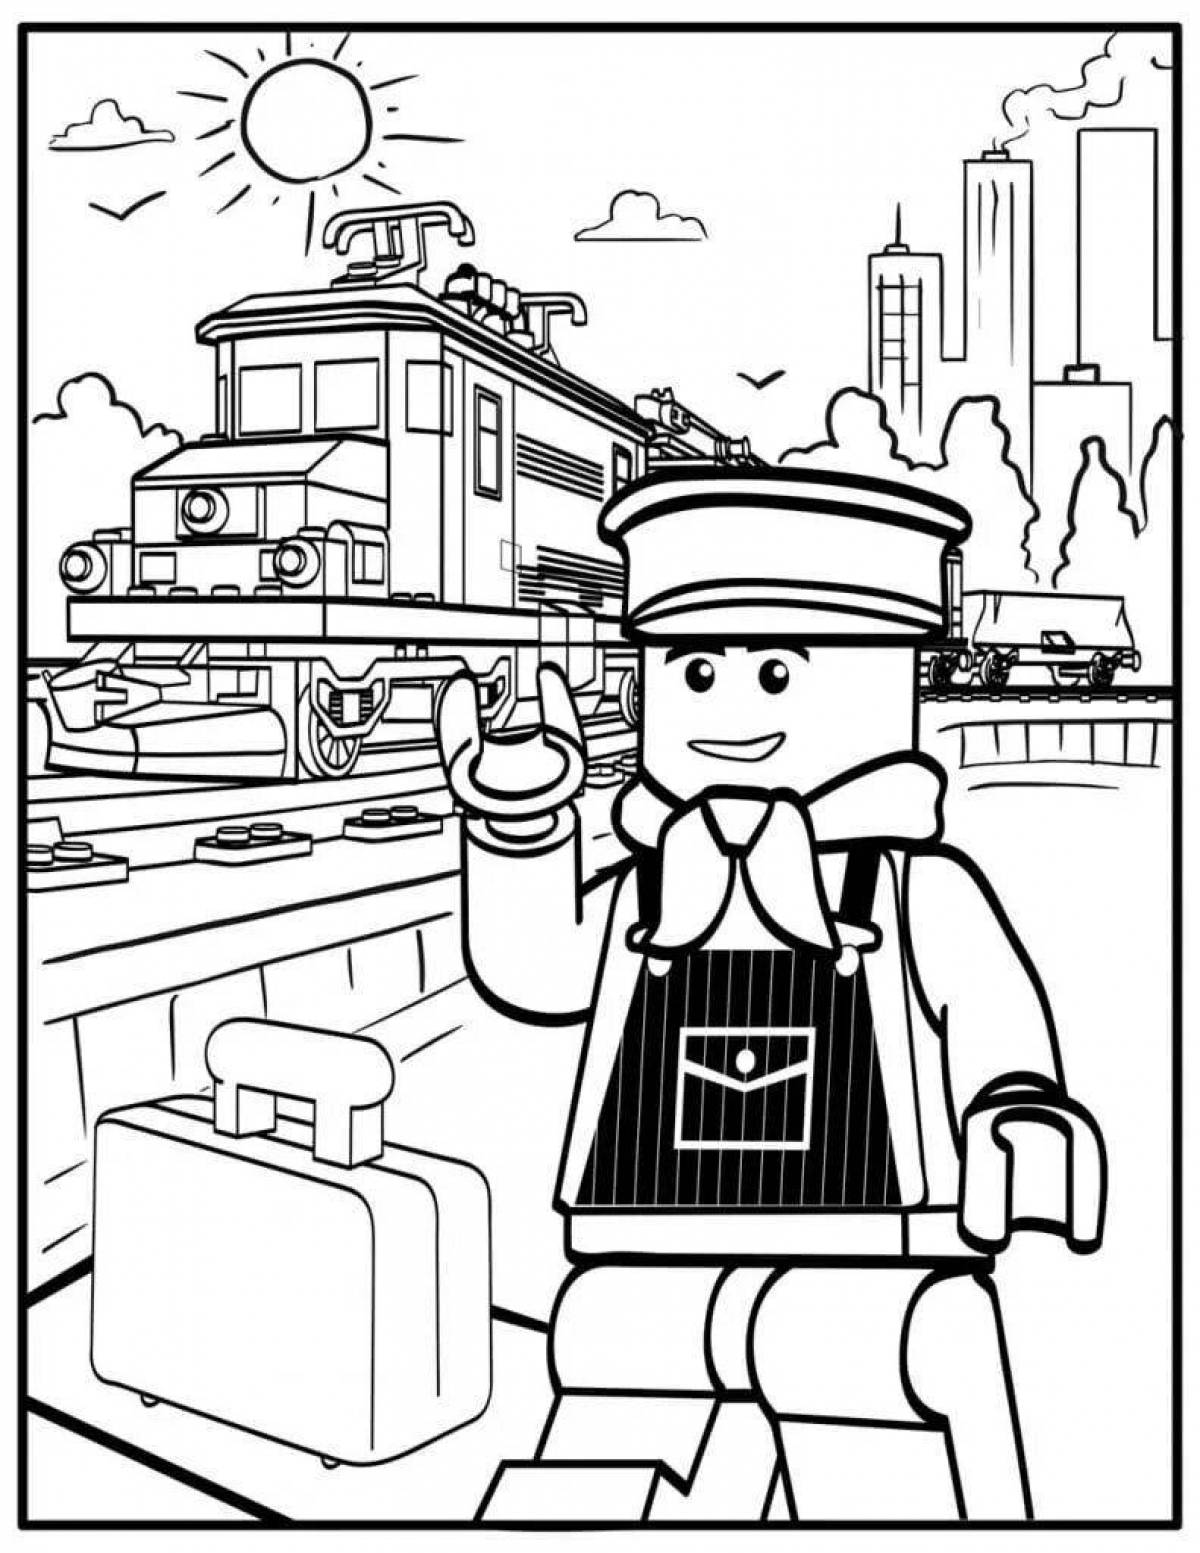 Fun coloring lego police station